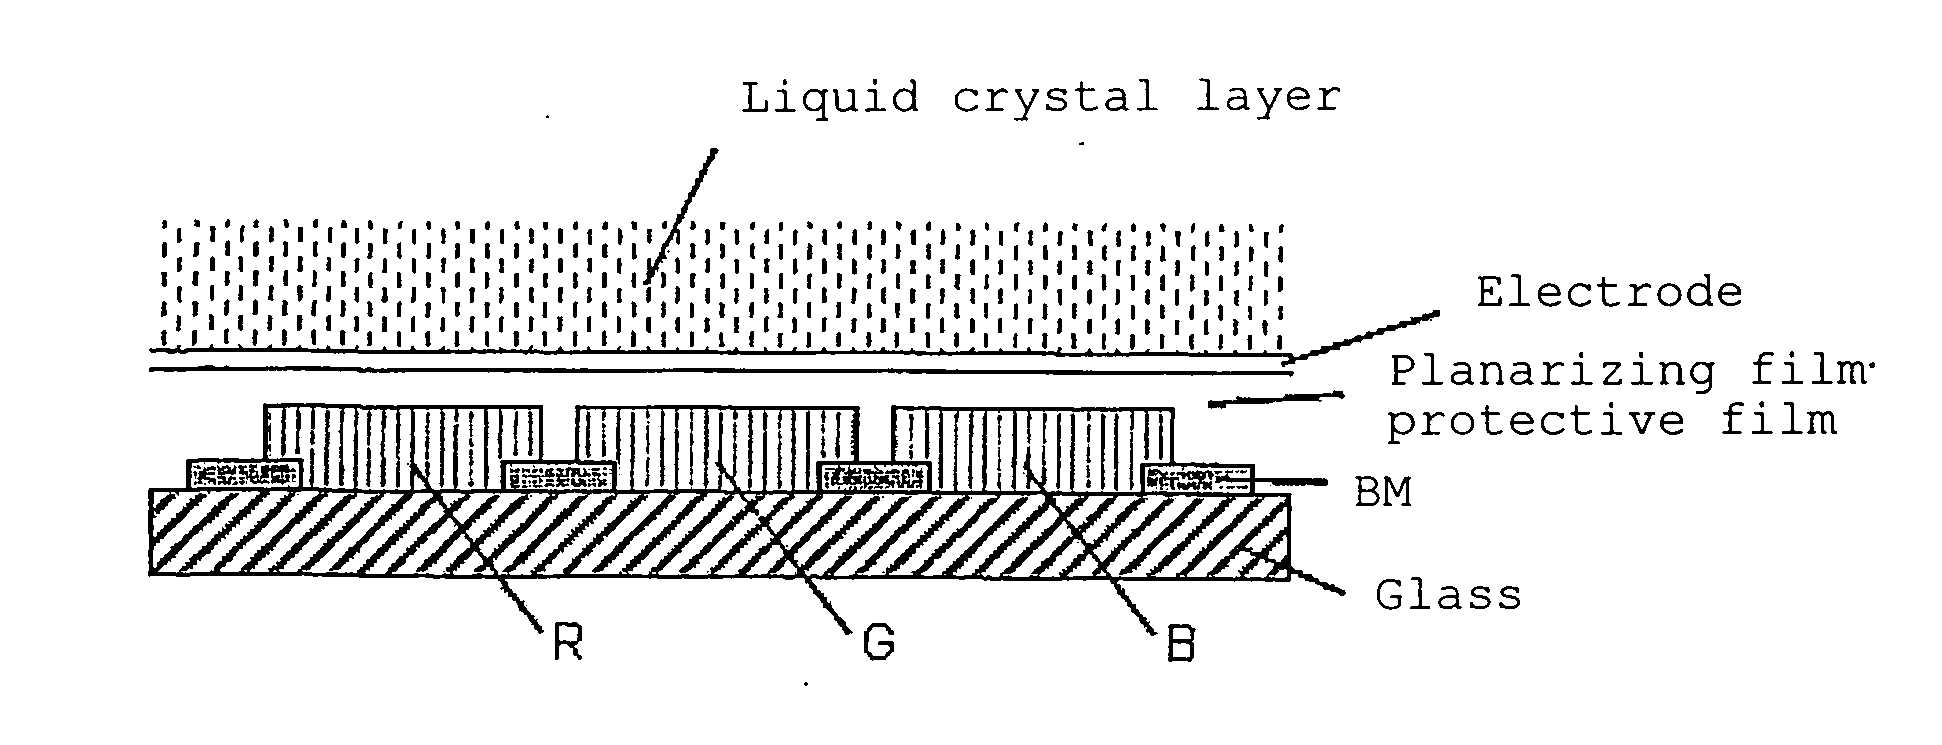 Radiation sensitive resin composition and method of forming an interlayer insulating film